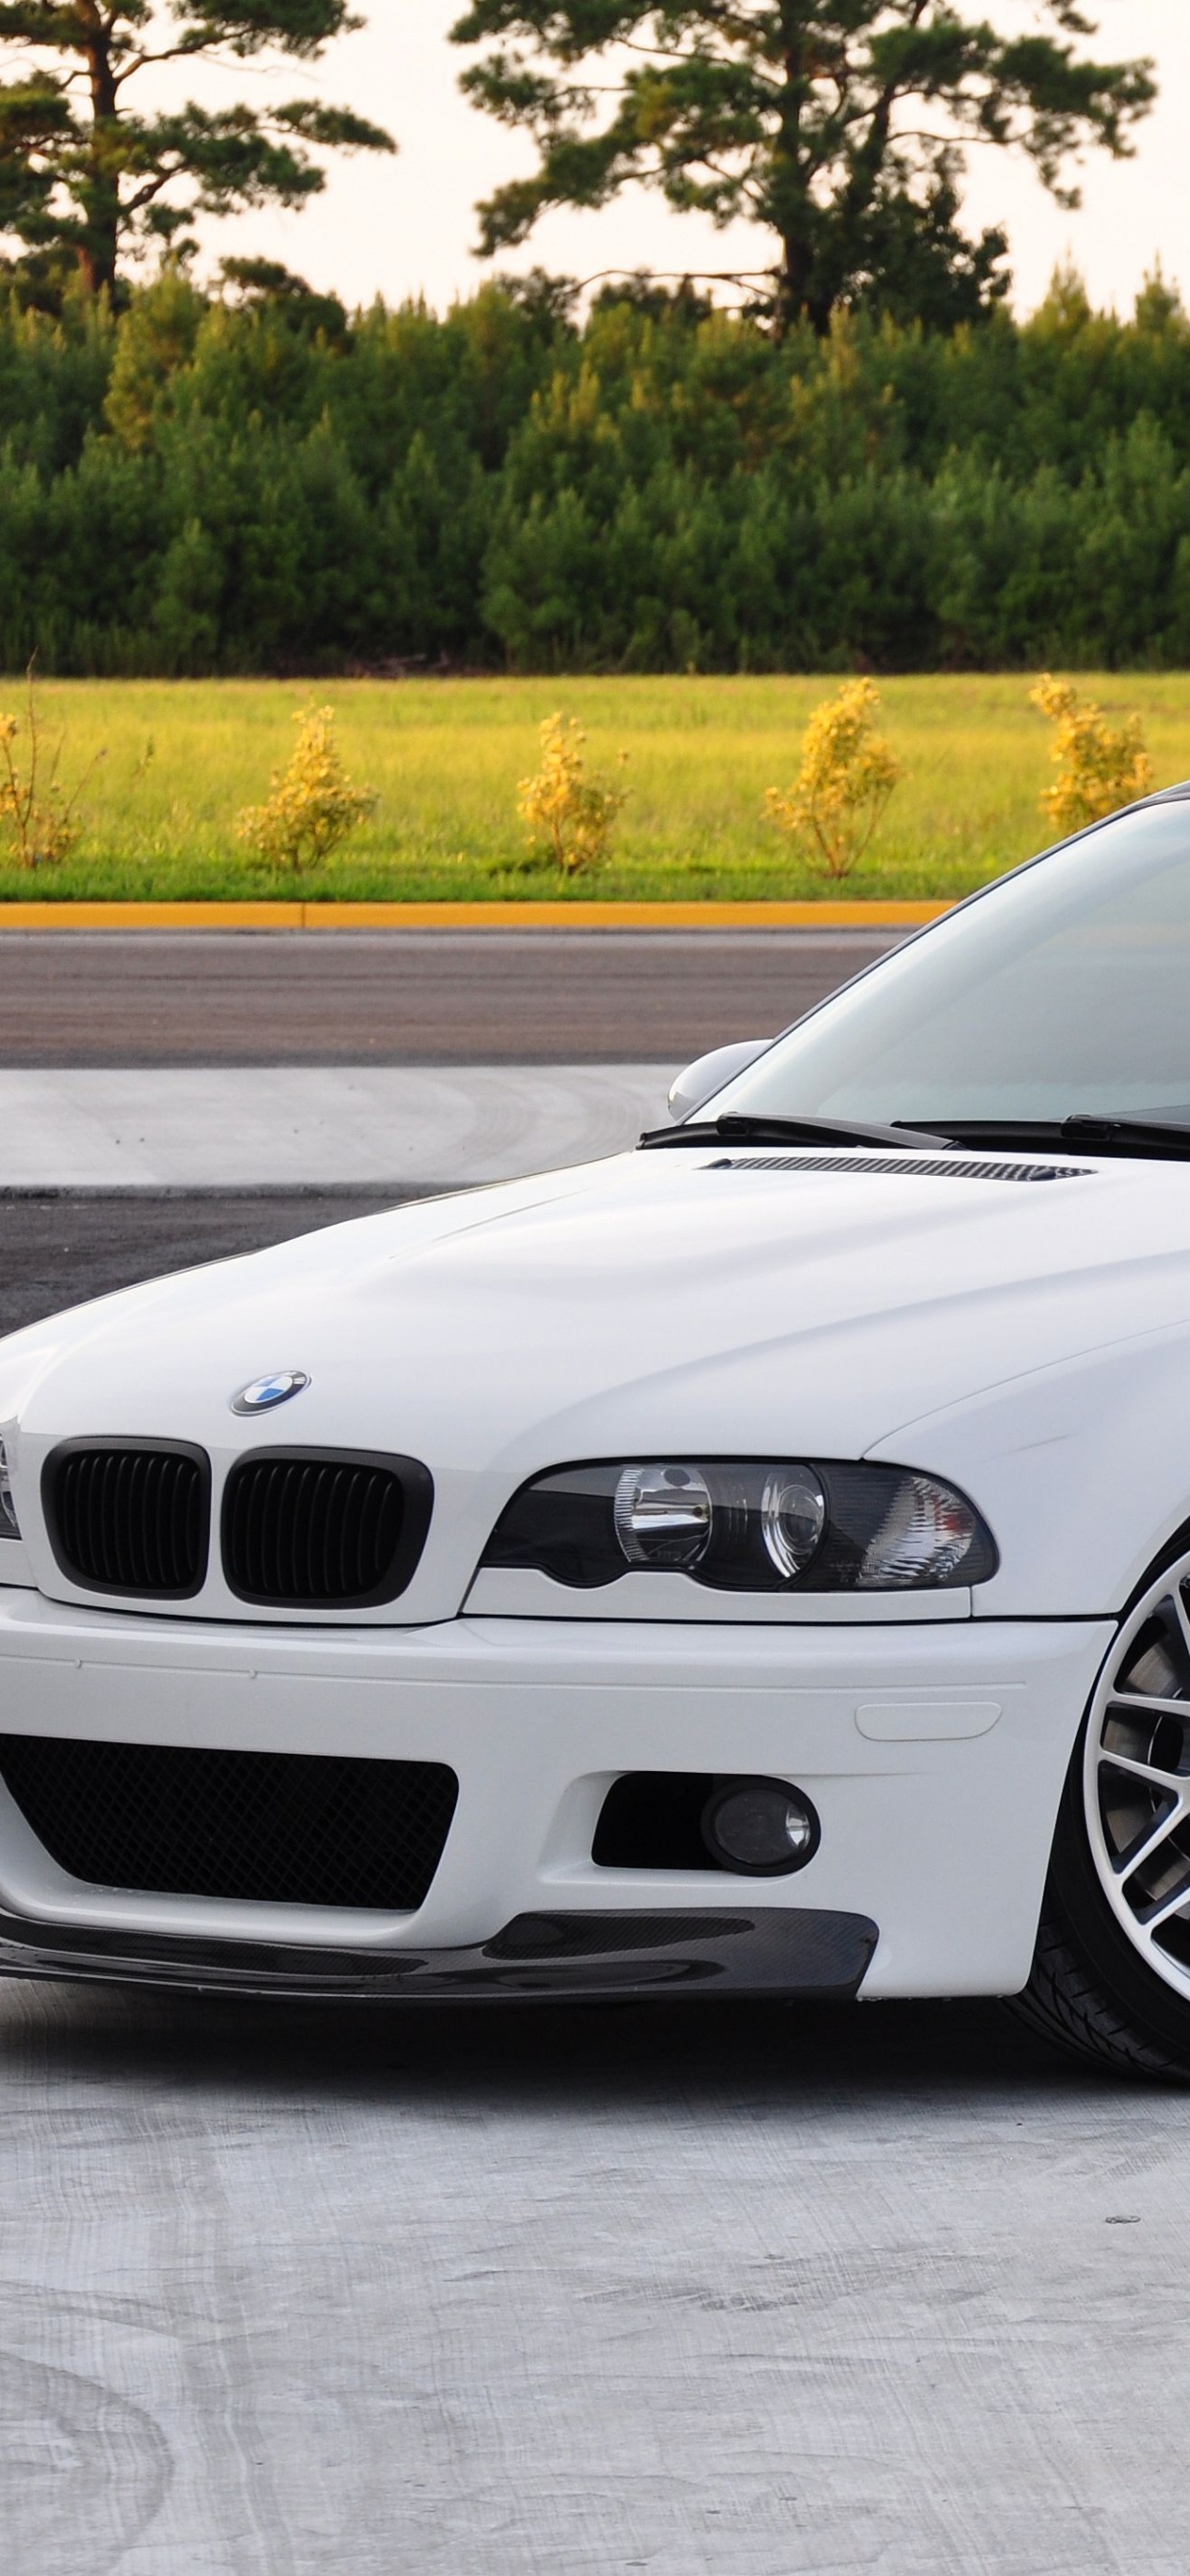 White Bmw m 3 Coupe on Road During Daytime. Wallpaper in 1242x2688 Resolution